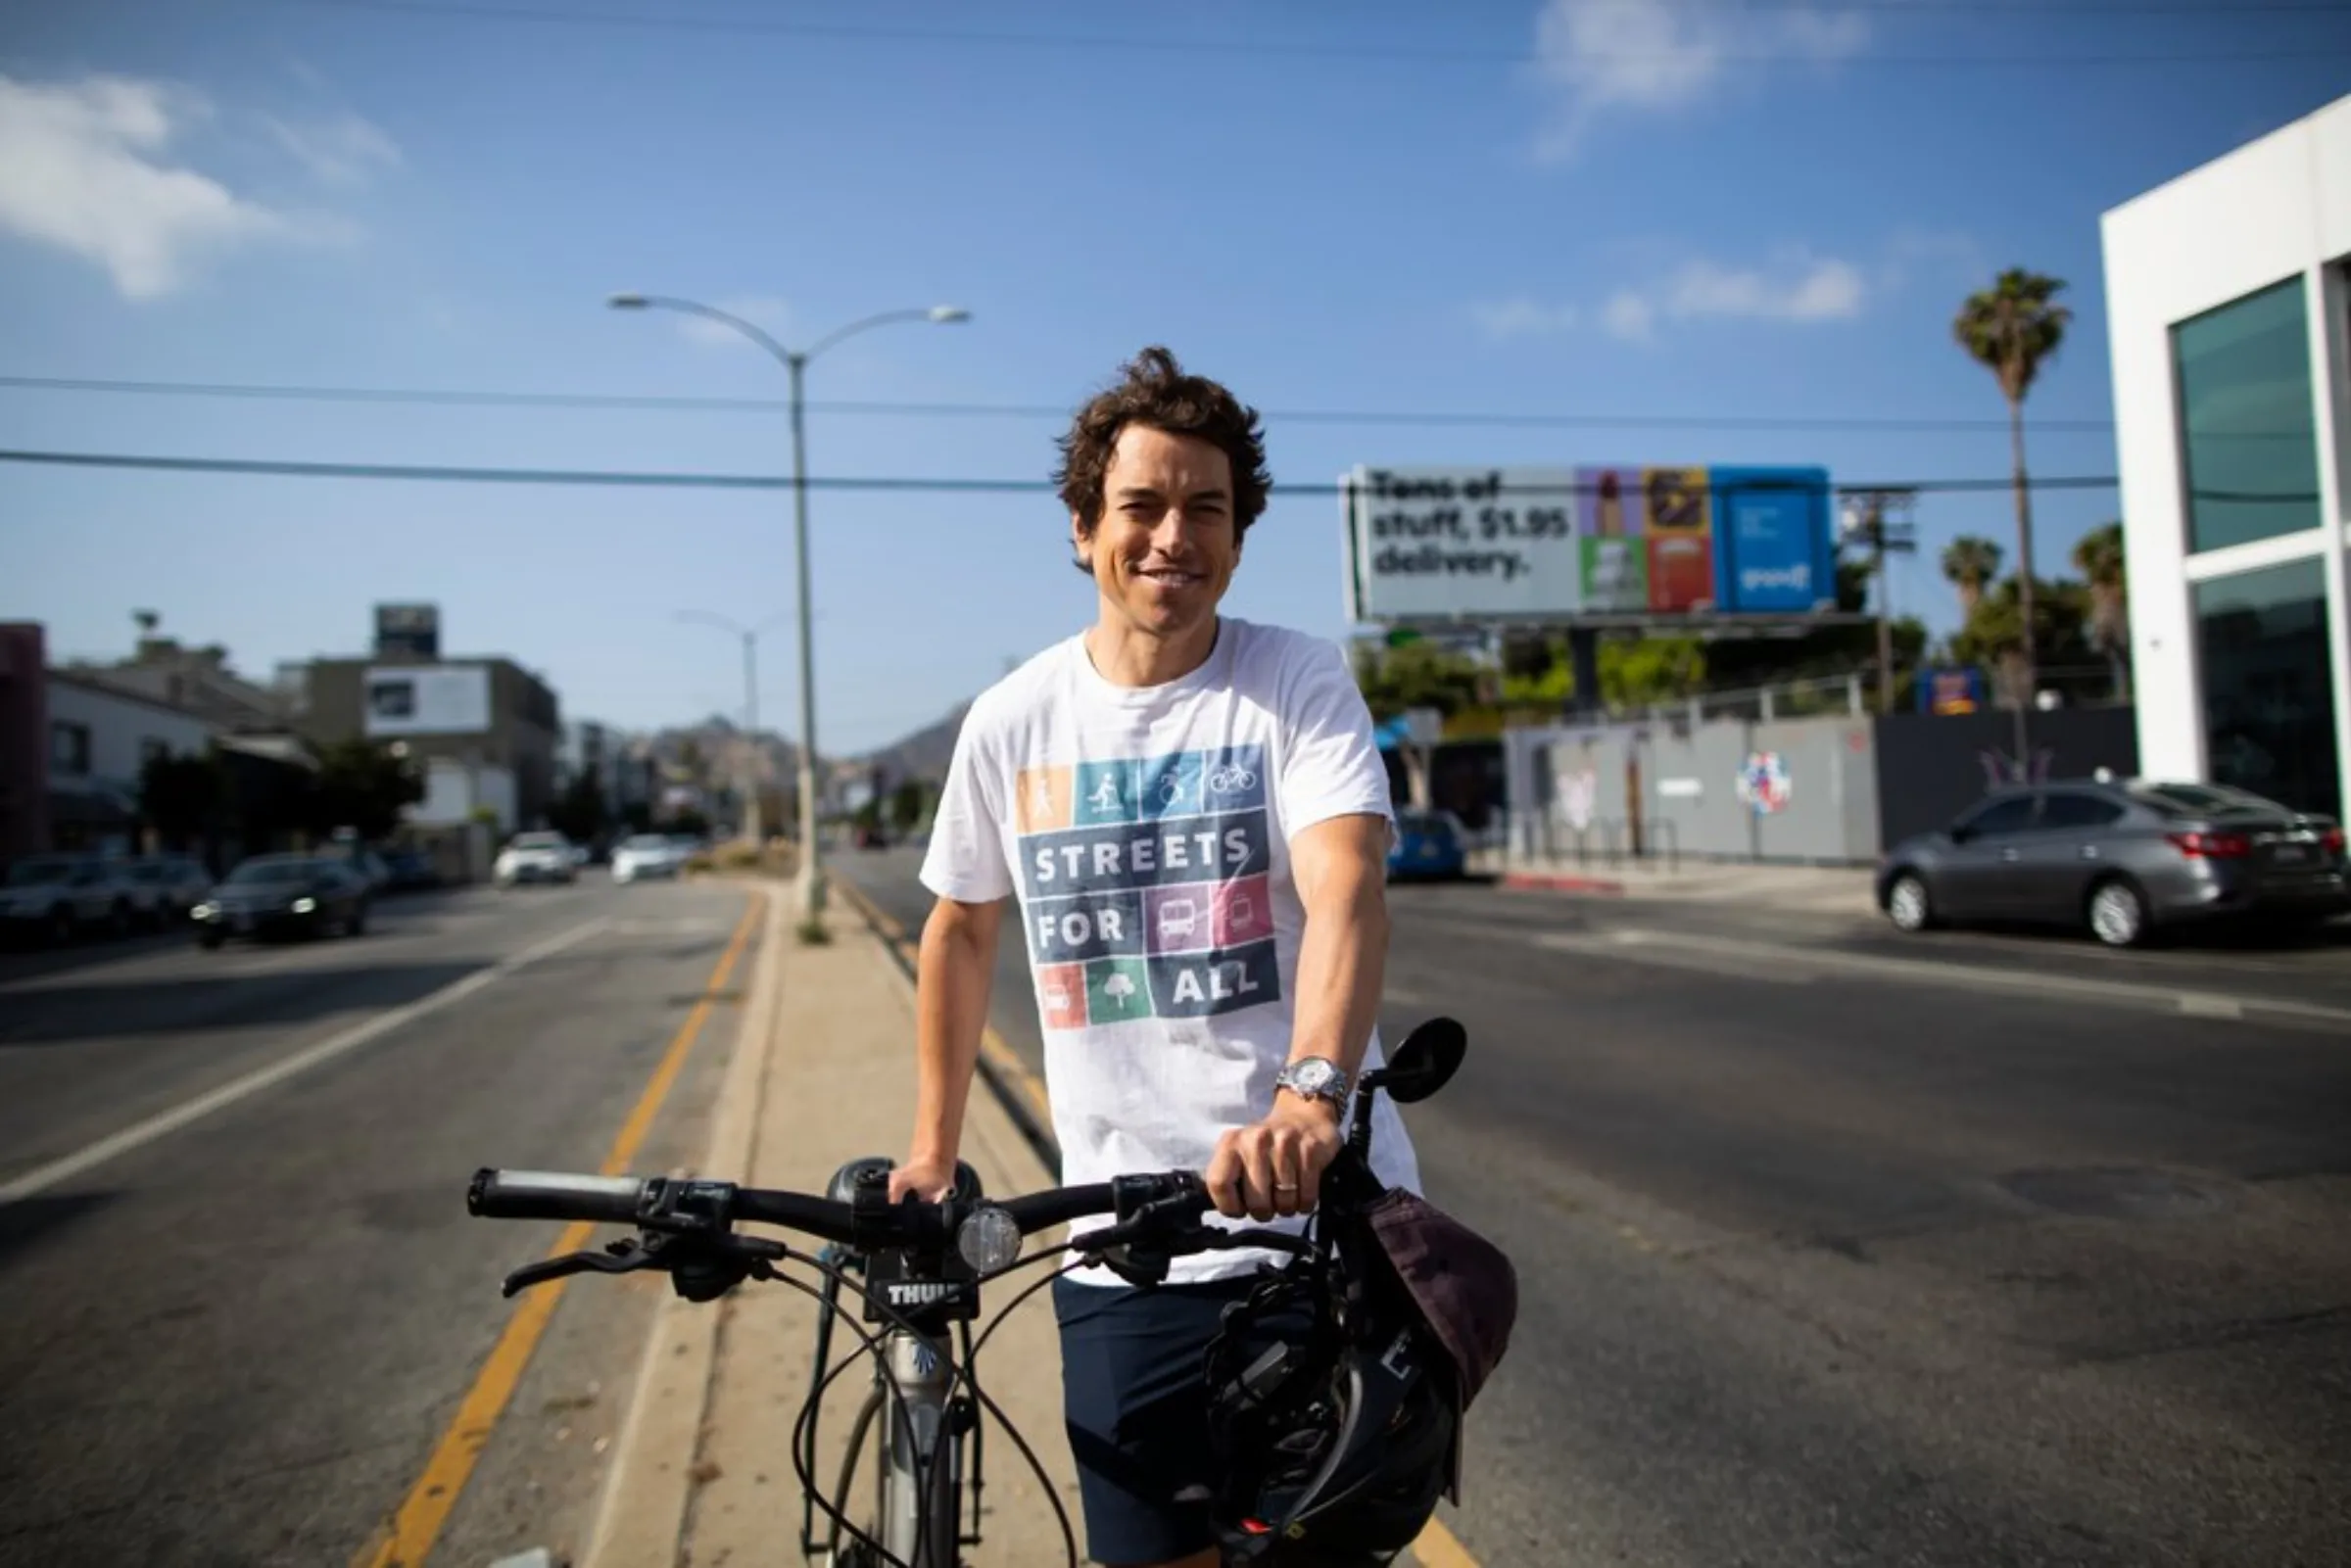 Michael Schneider, a cycling activist and founder of Streets for All, stops his bicycle along a median in West Hollywood, Los Angeles, May 19, 2021